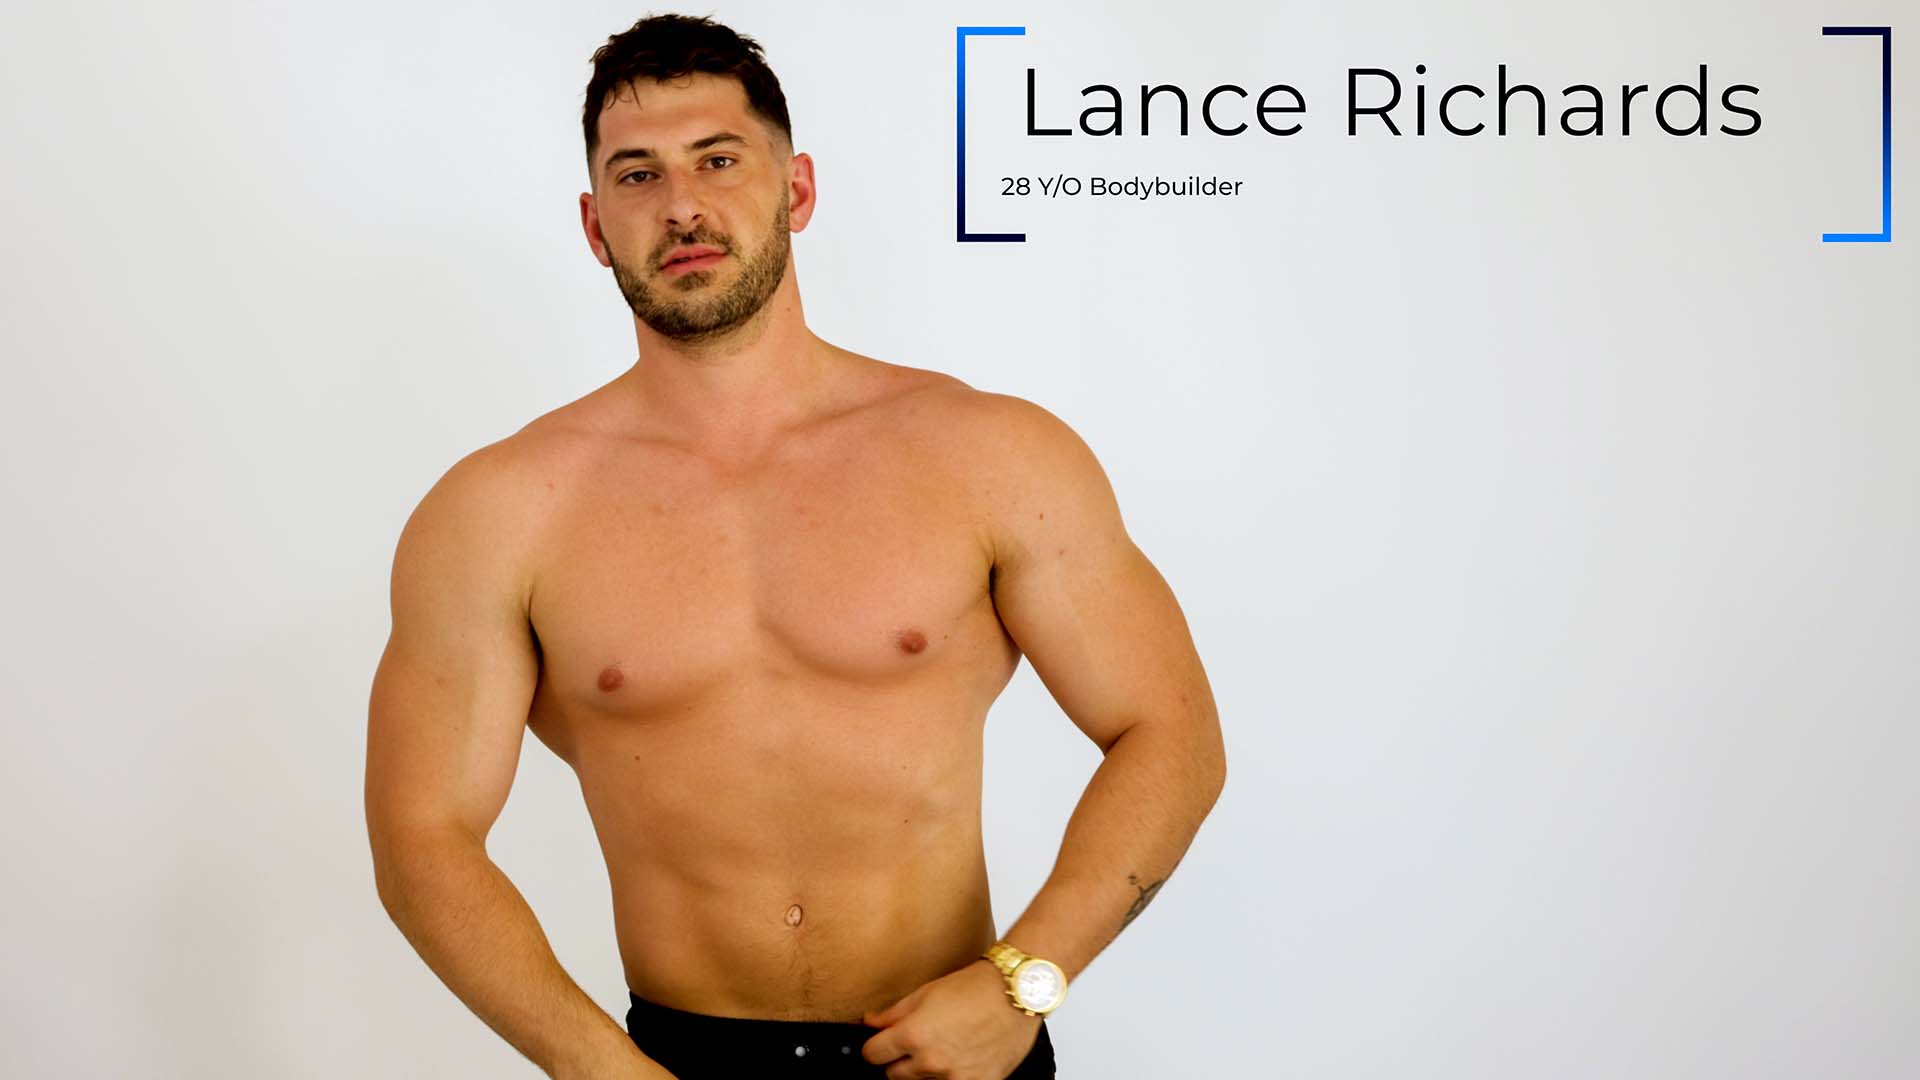 Super Bro Lance Richards Is Pumped To Get His Porn Career Started!